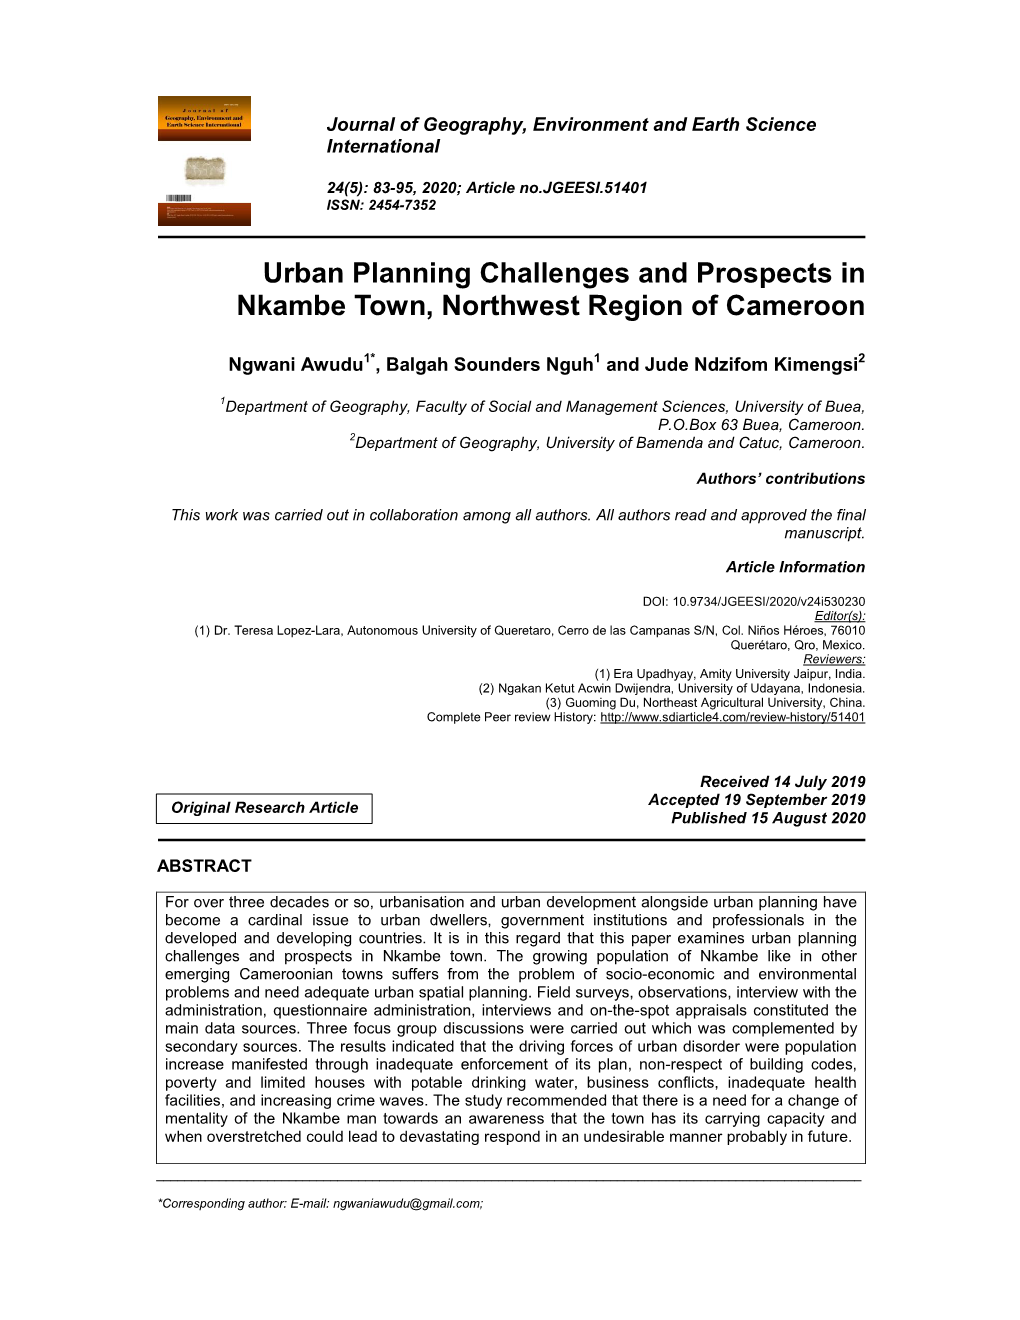 Urban Planning Challenges and Prospects in Nkambe Town, Northwest Region of Cameroon